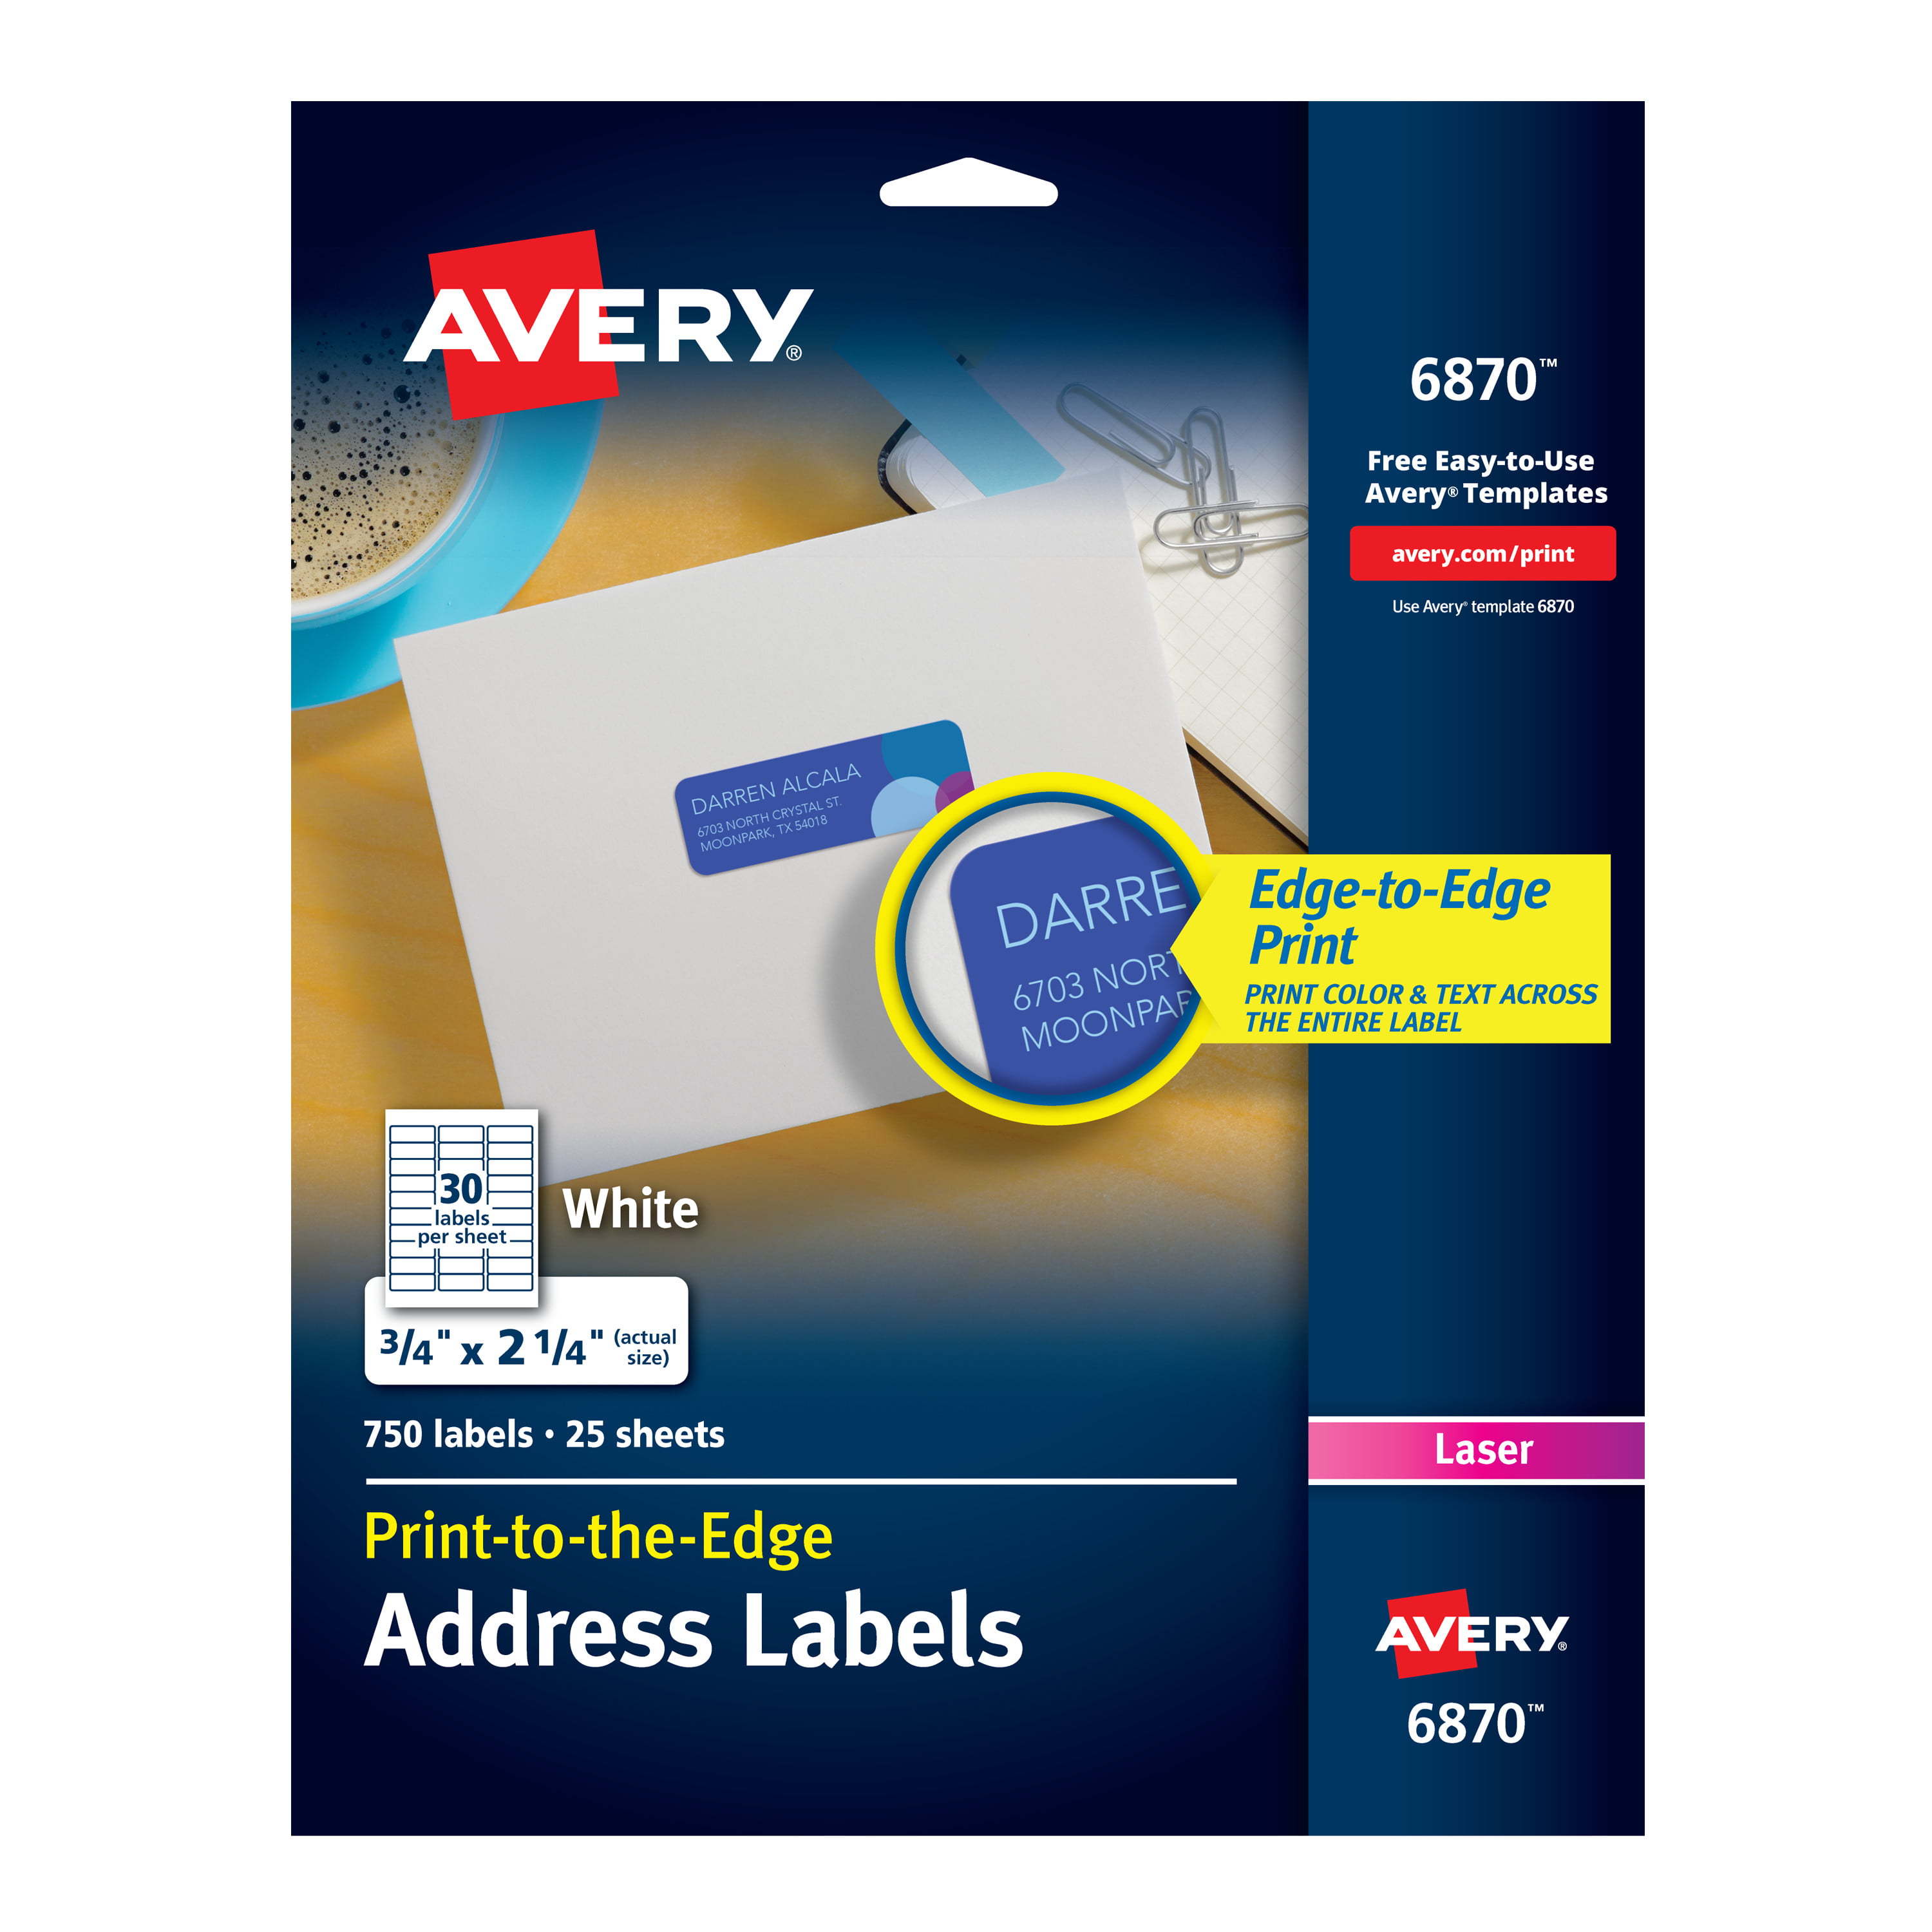 Printed Personalized Return Mailing Address Labels Stickers 1/2" x 1 3/4"